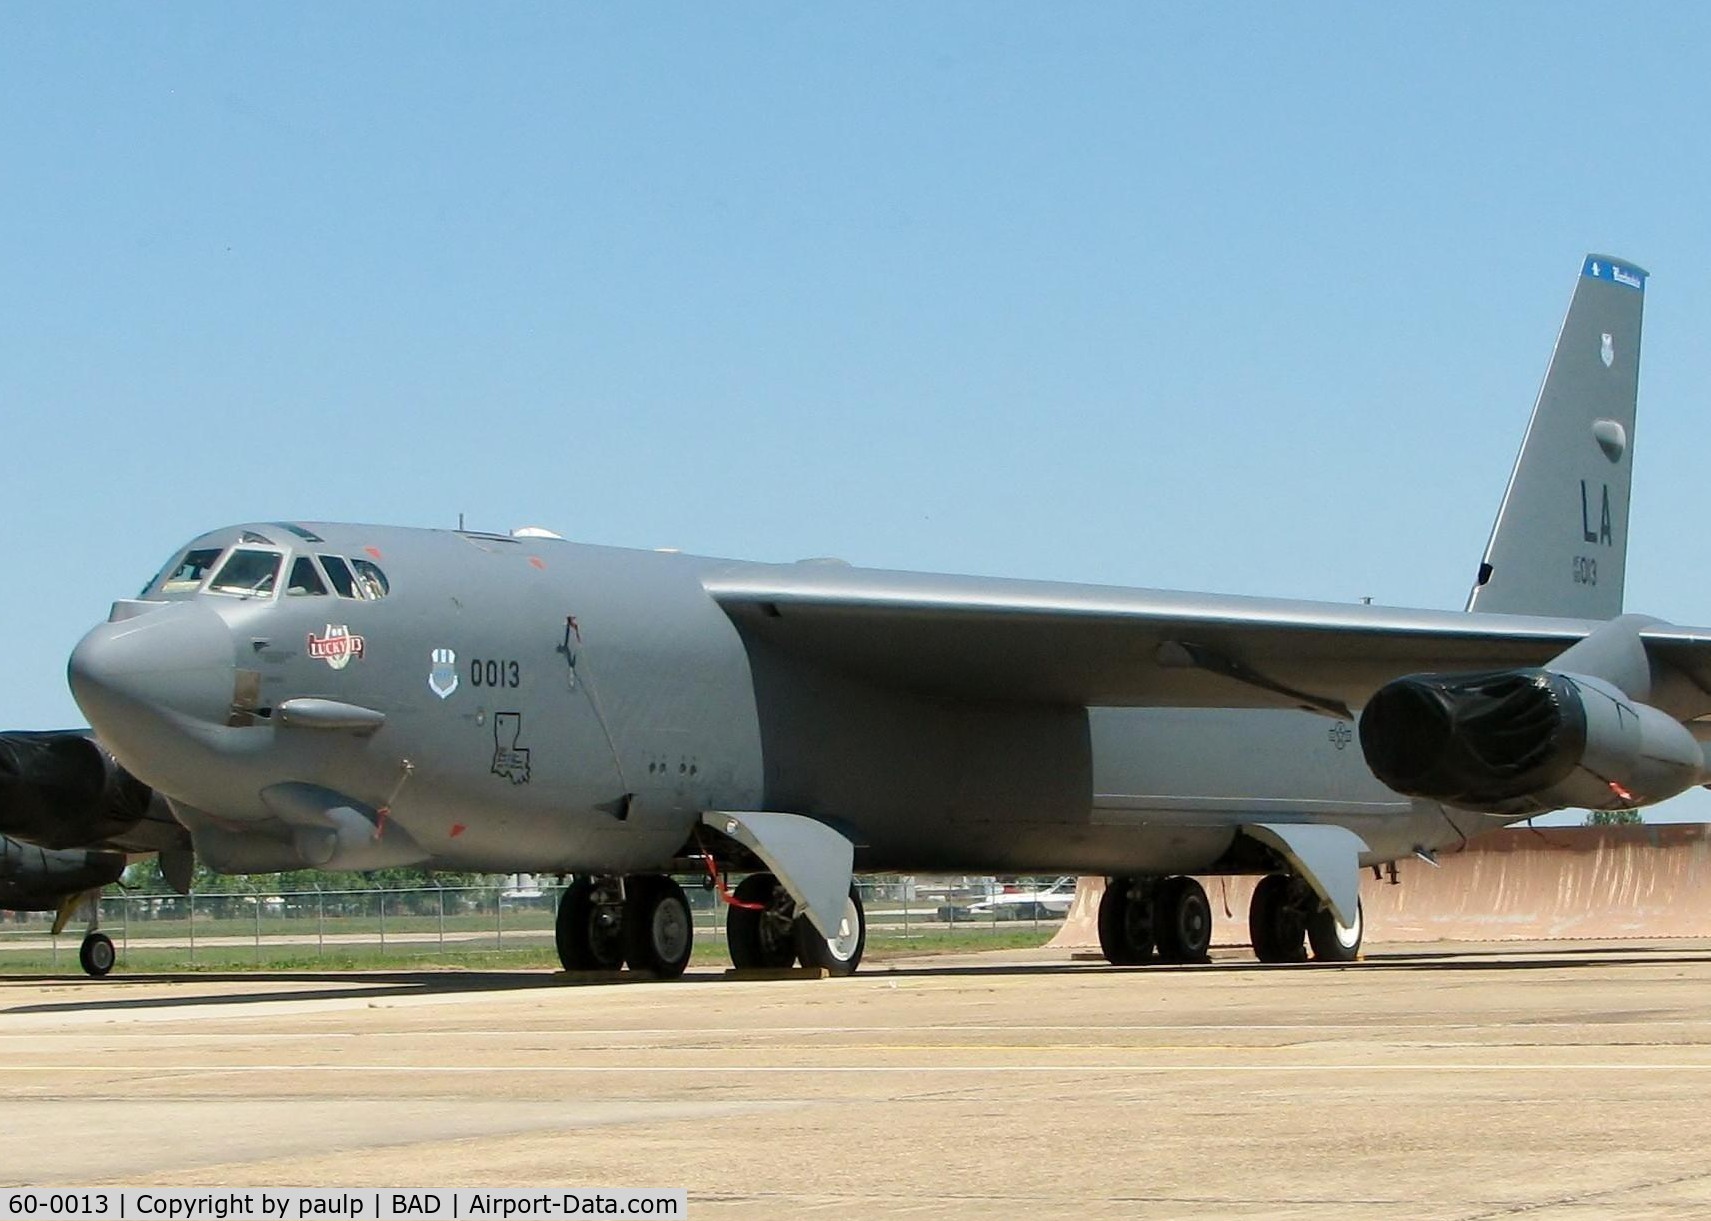 60-0013, 1960 Boeing B-52H-135-BW Stratofortress C/N 464378, At Barksdale Air Force Base.